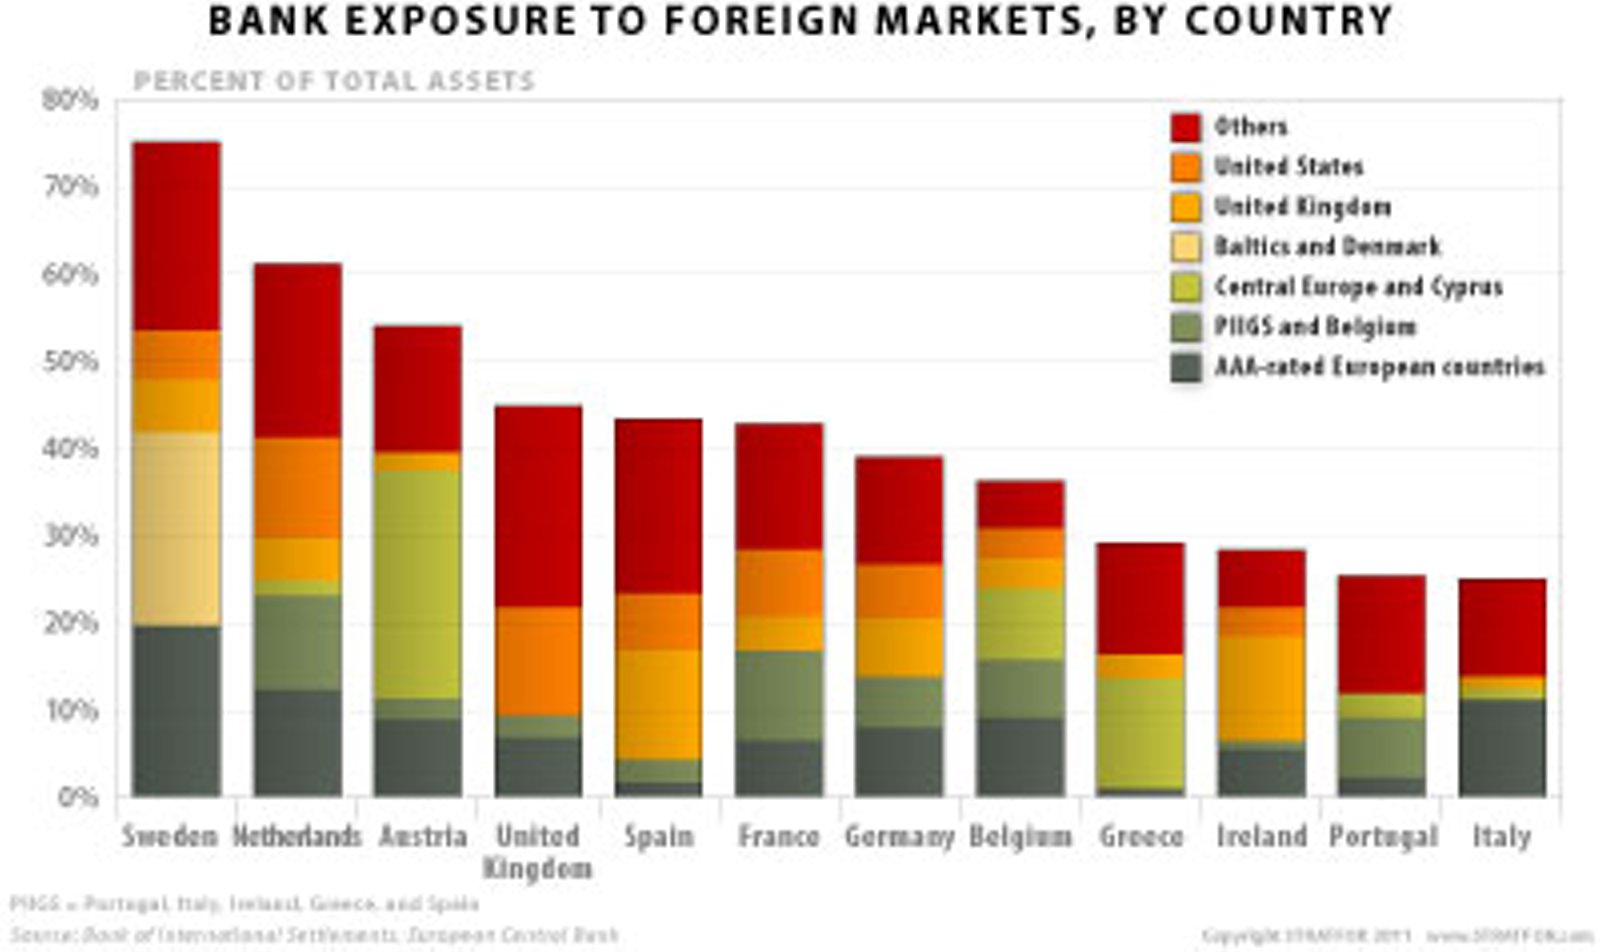 http://einarbb.blog.is/users/72/einarbb/img/bank_exposure_to_foreign_markets_by_country.jpg